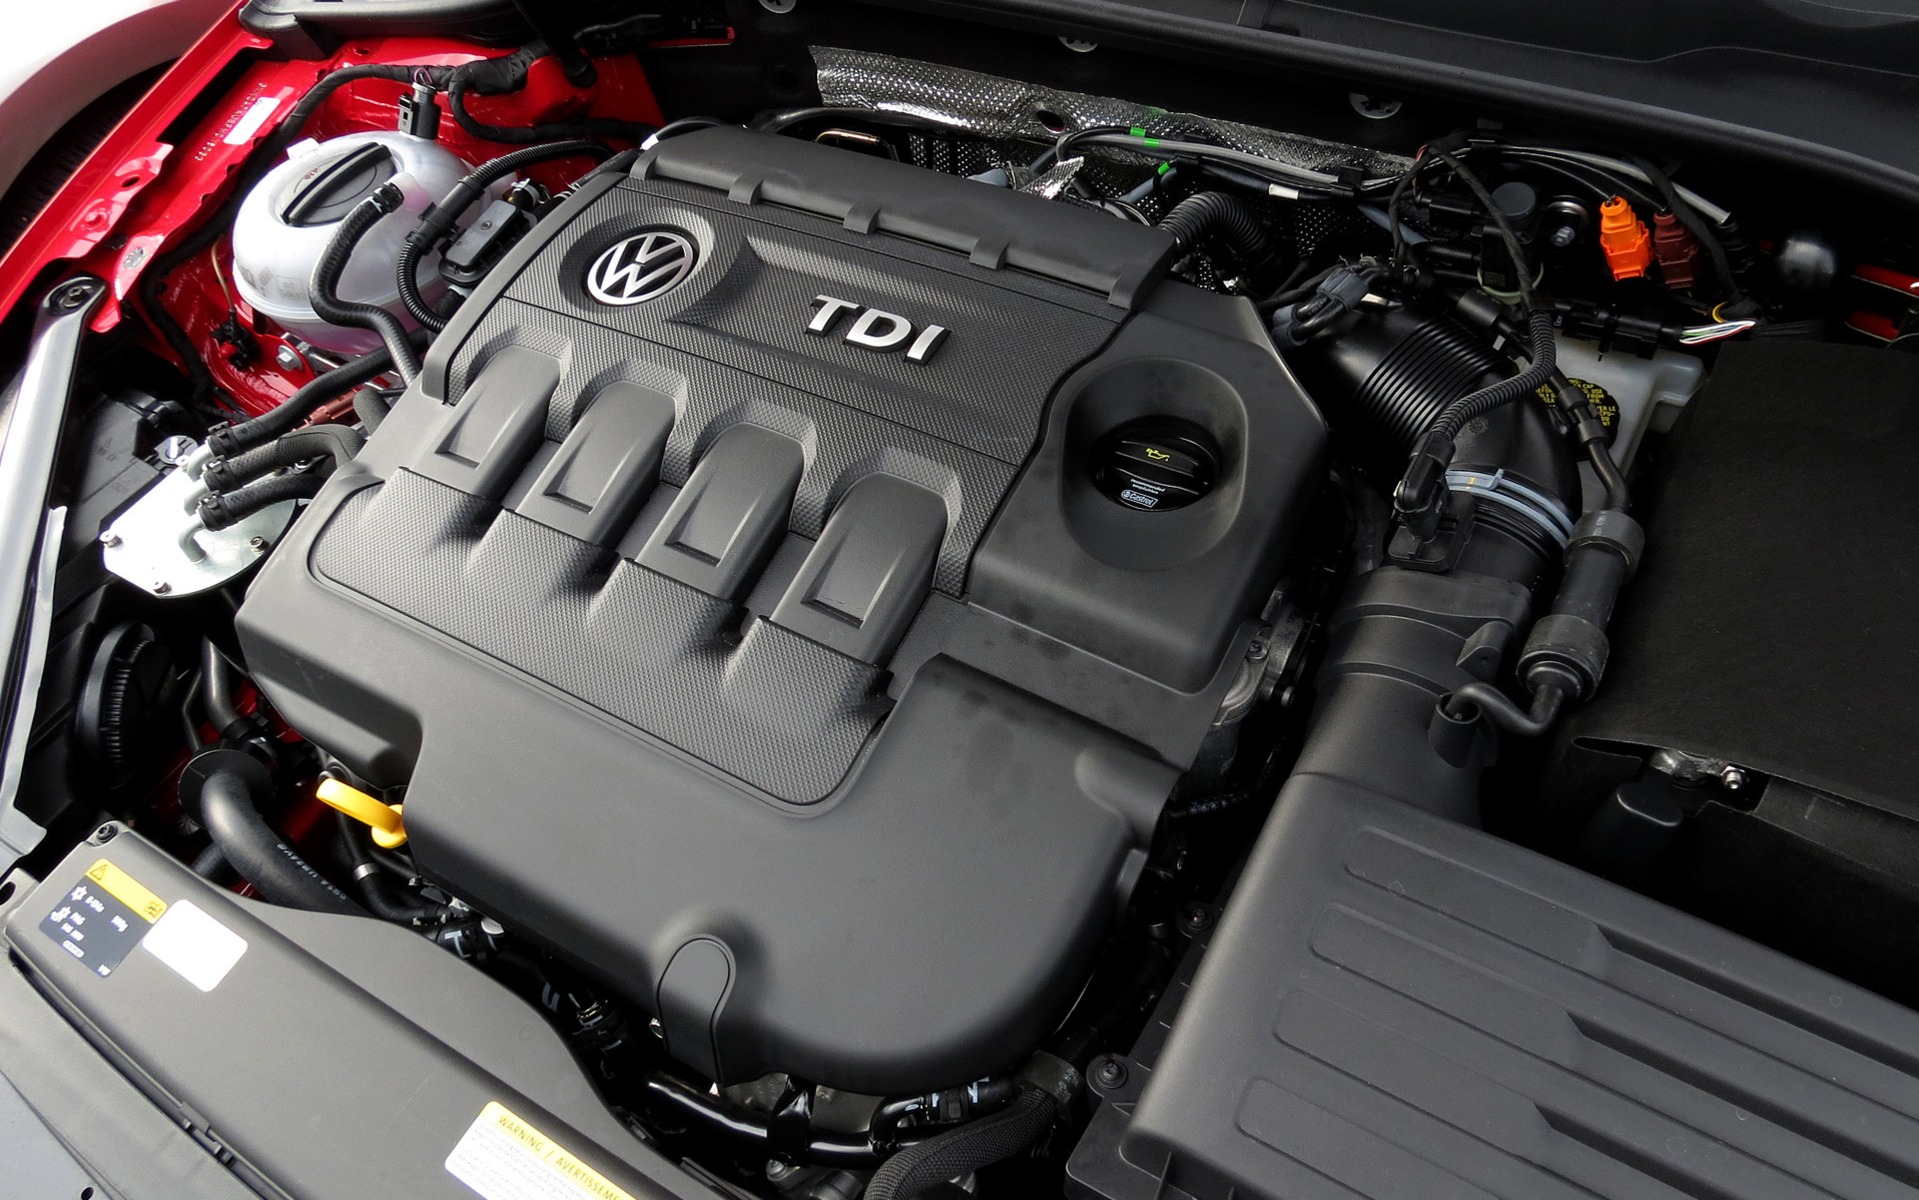 The 2.0-litre turbodiesel four in the TDI is also new.